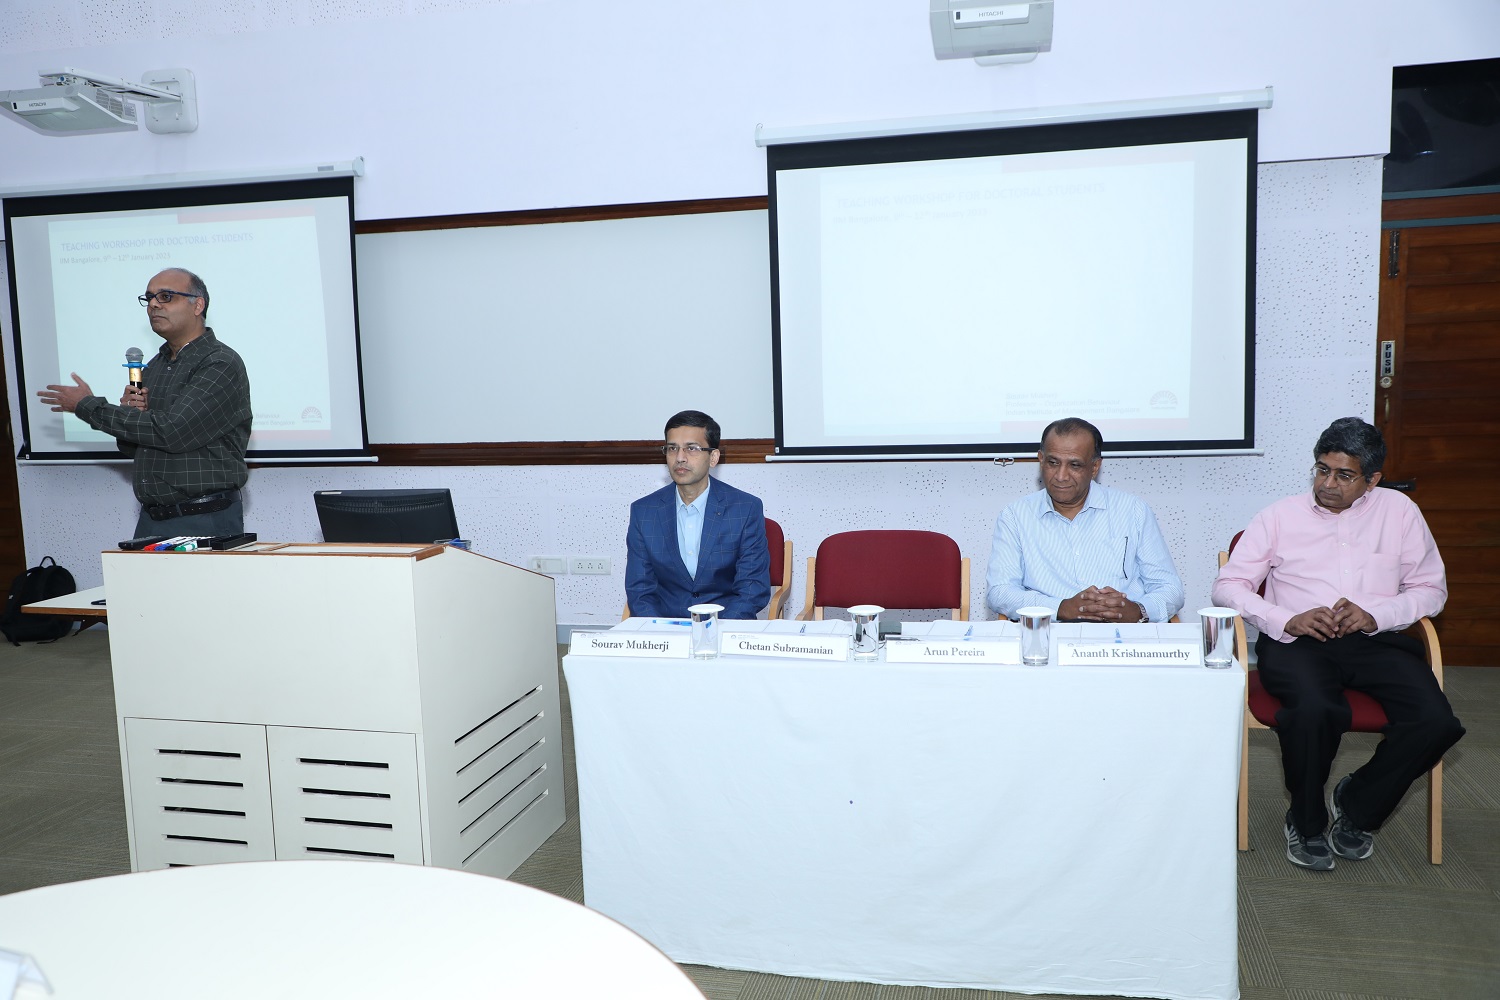 Prof. Chetan Subramanian, Dean Faculty and CTL Chairperson, inaugurates  the Consortium and welcomes the participants.